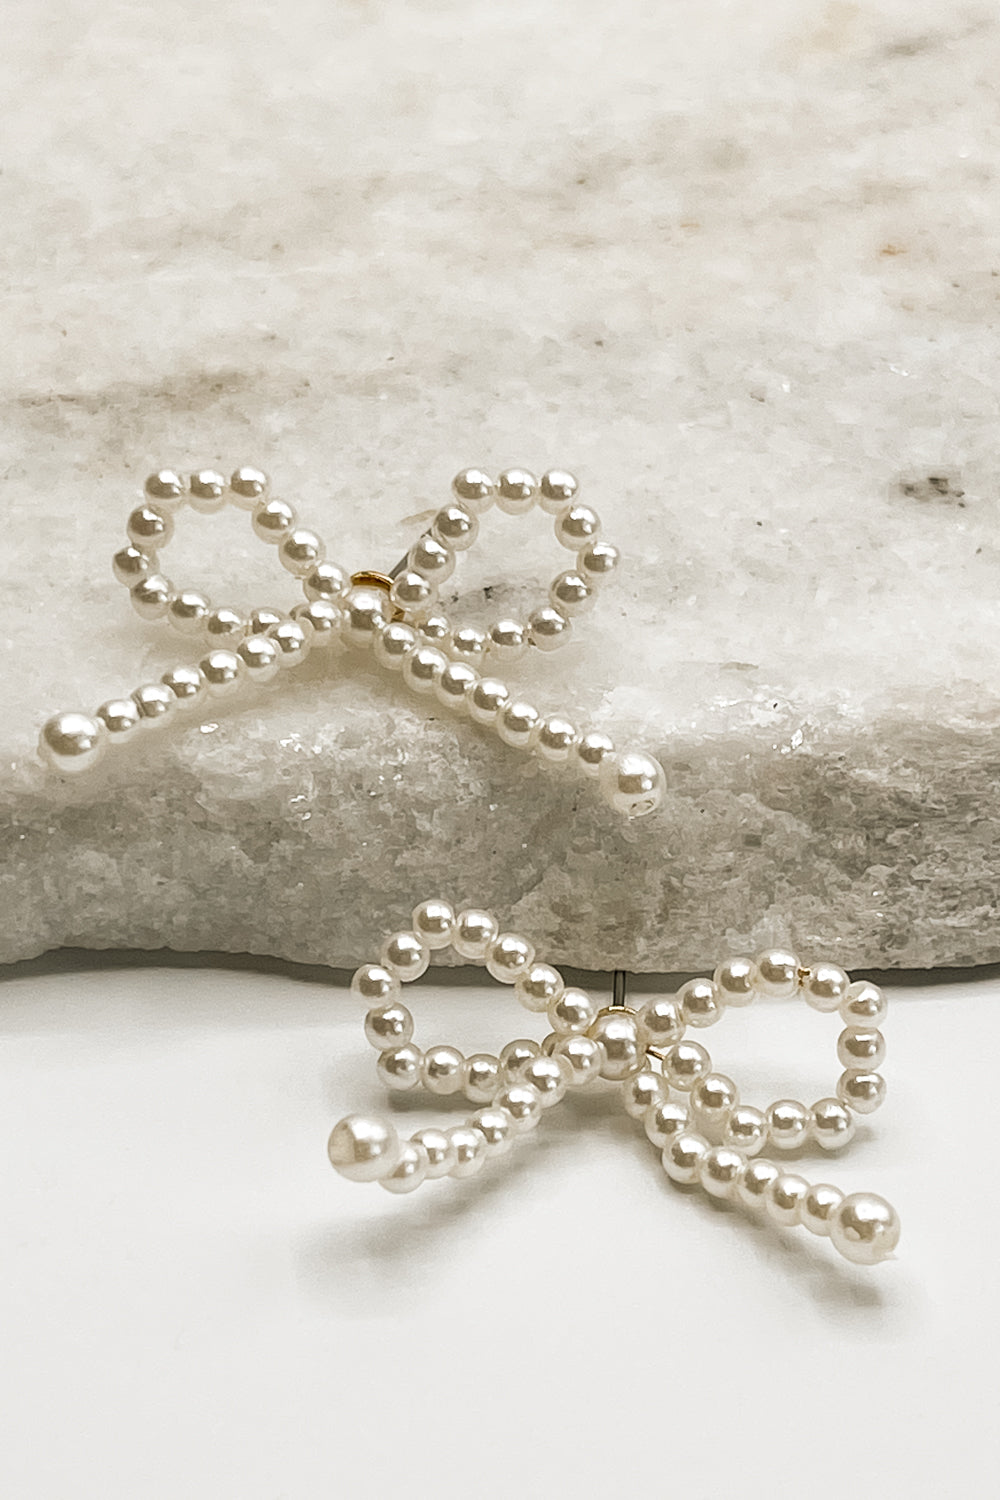 The Capri Bow Earrings lay against a neutral background.